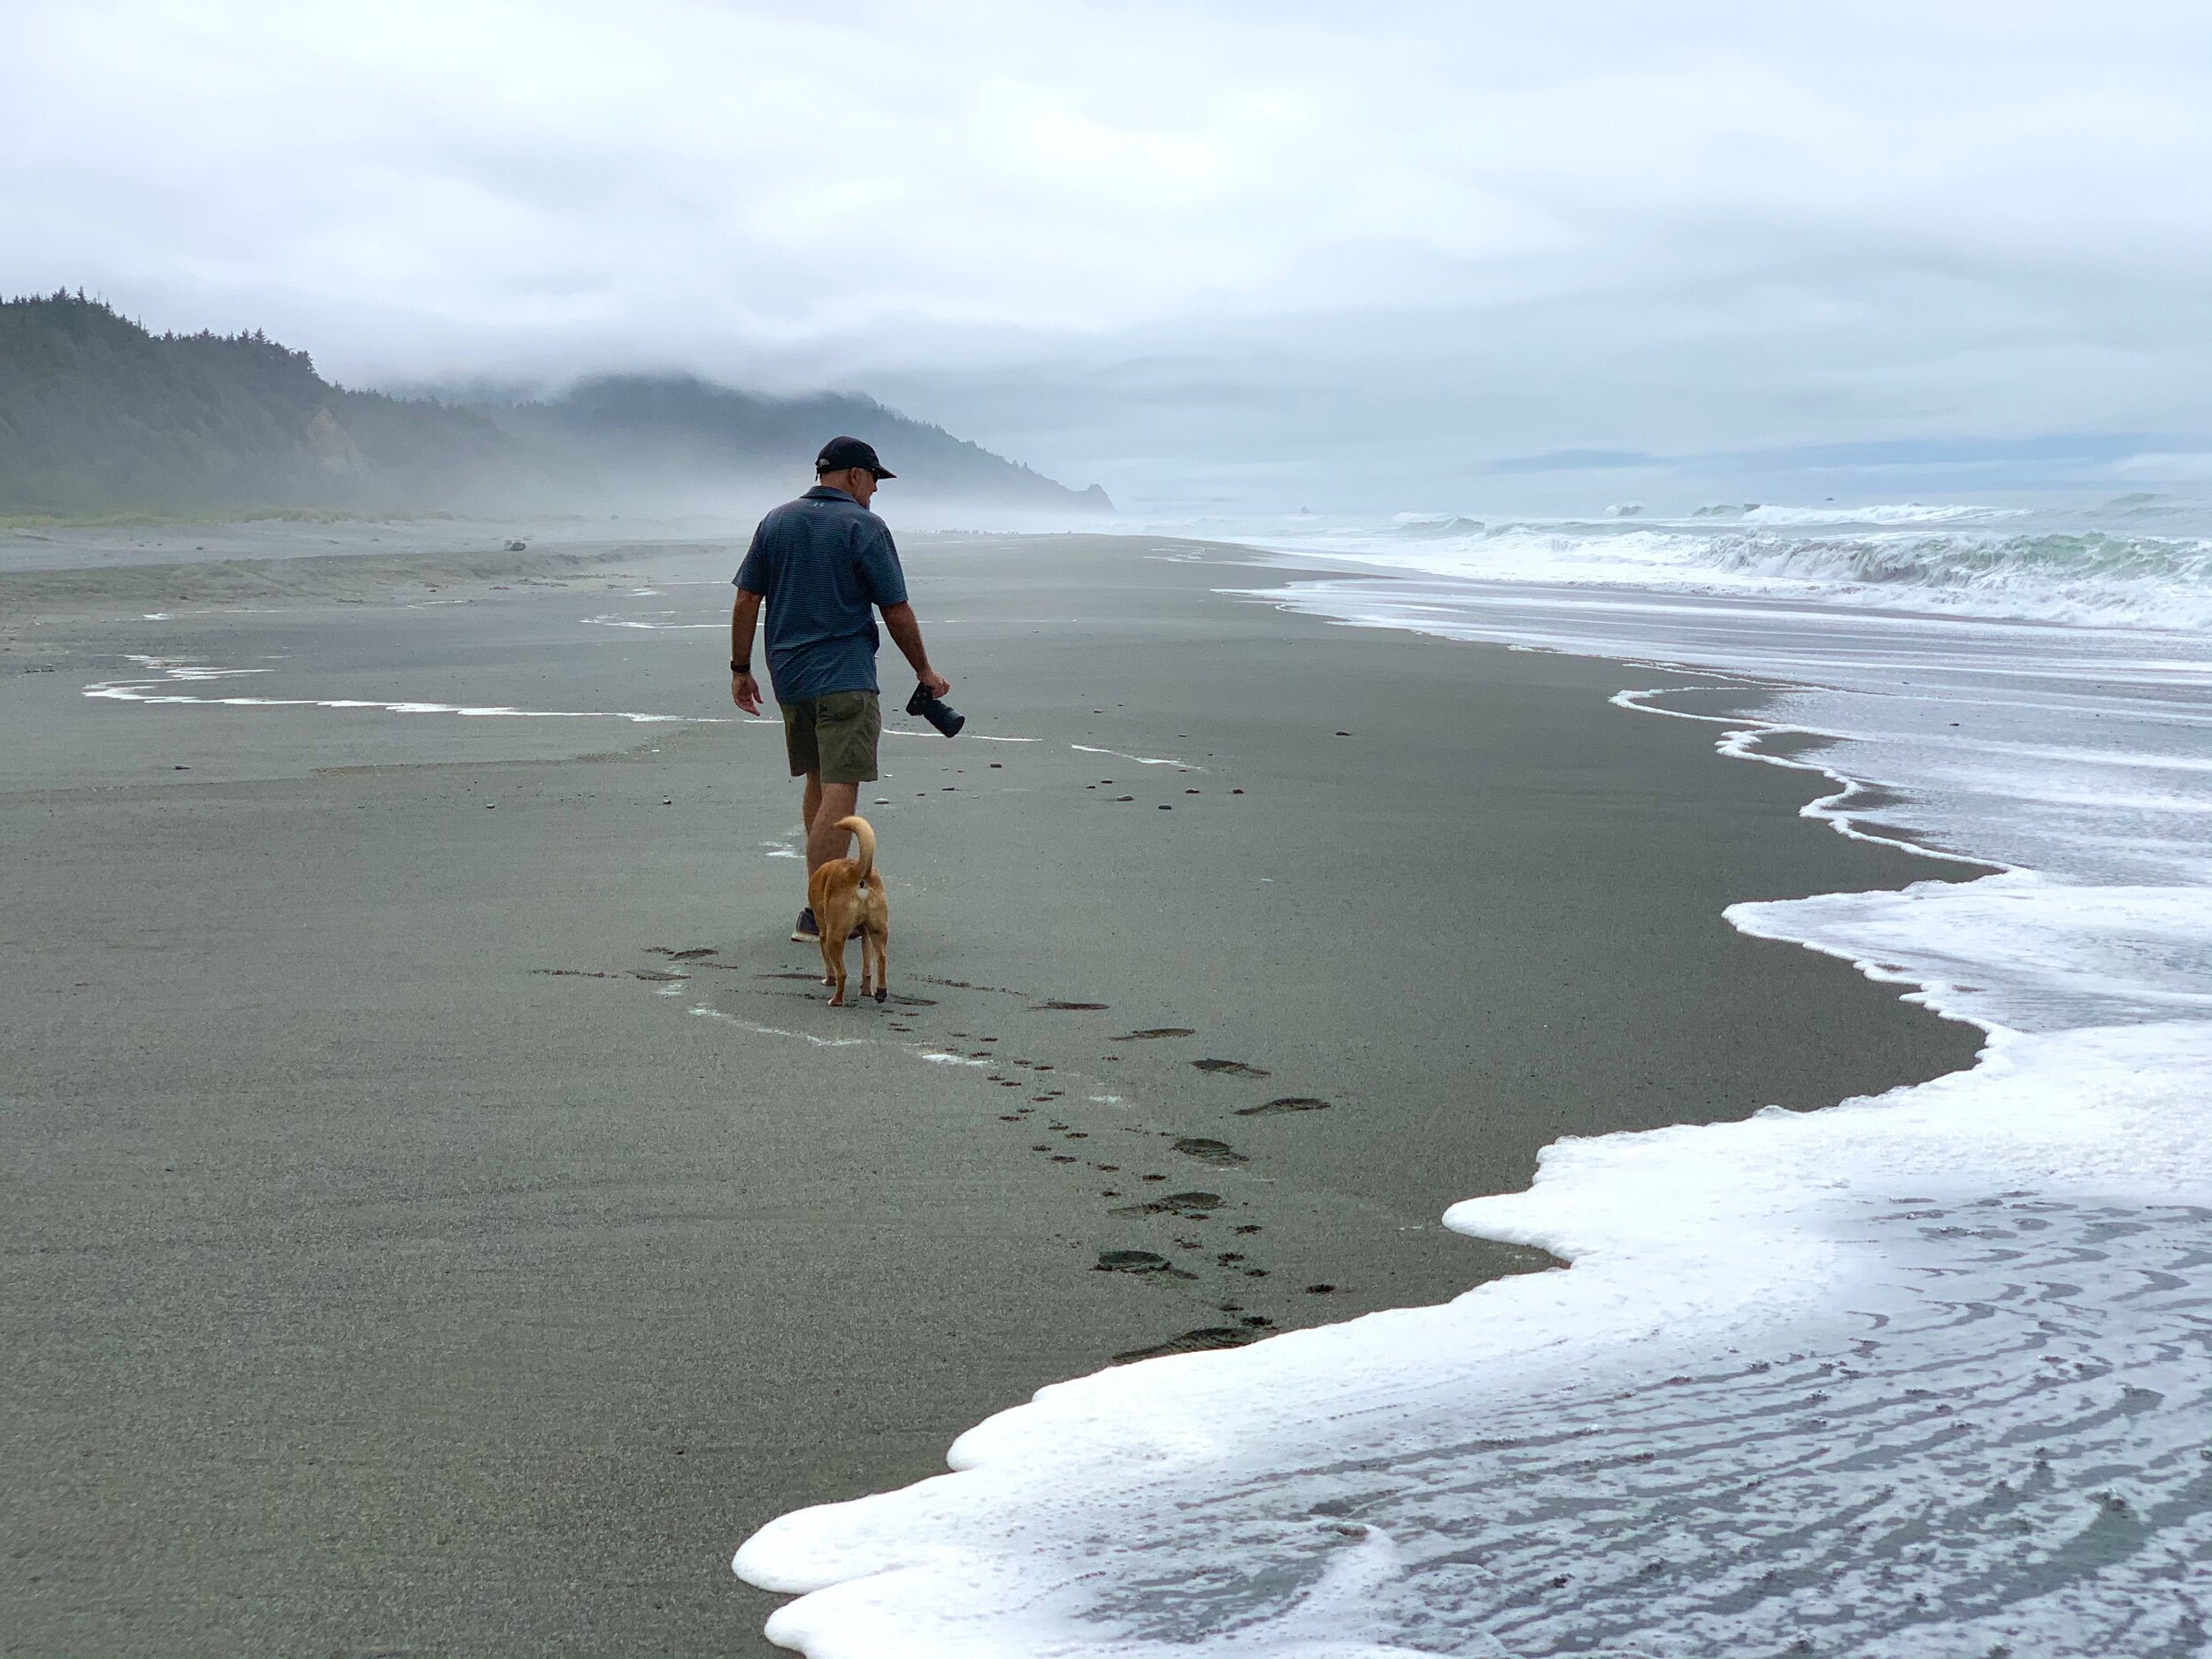  Less than a mile from Prairie Creek Park is  Gold Bluffs Beach.  Many people were in Fern Canyon, but to our amazement, not a single person on this beautiful beach.  